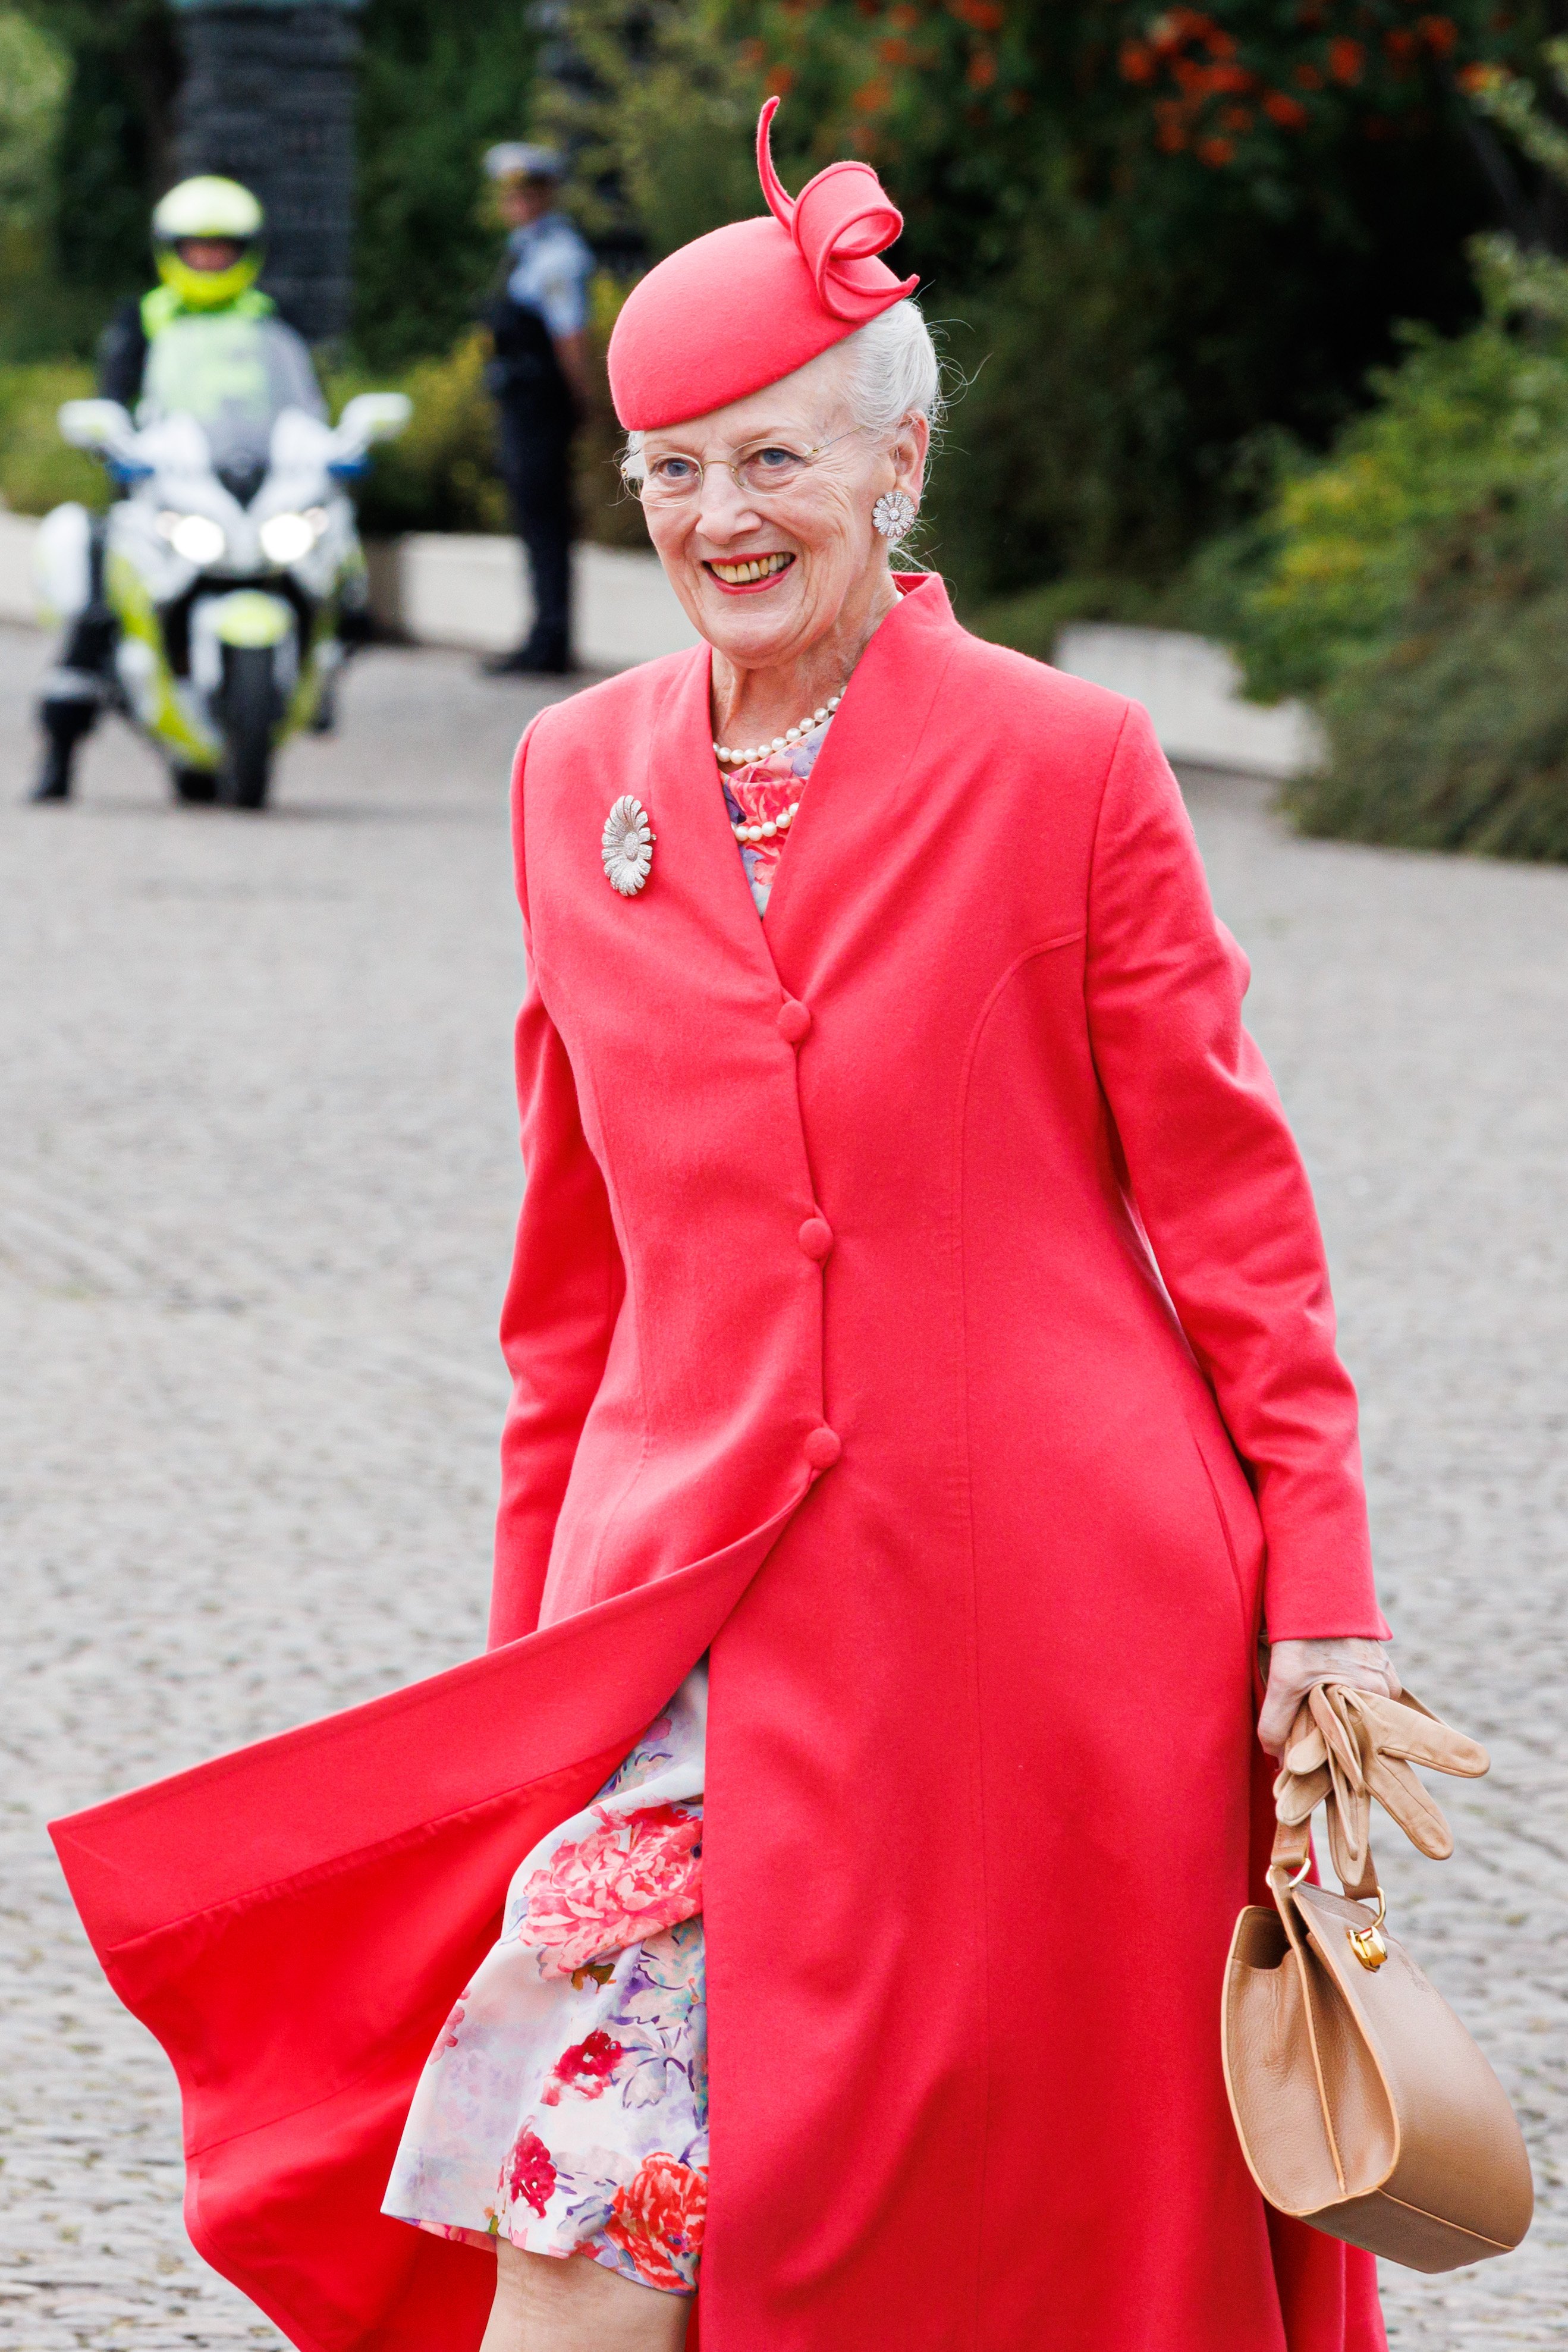 Queen Margrethe of Denmark arrives at the Royal yacht Dannebrog for lunch during the 50th anniversary of Her Queen Margrethe II of Denmark's accession to the throne on September 10, 2022, in Copenhagen, Denmark. | Source: Getty Images